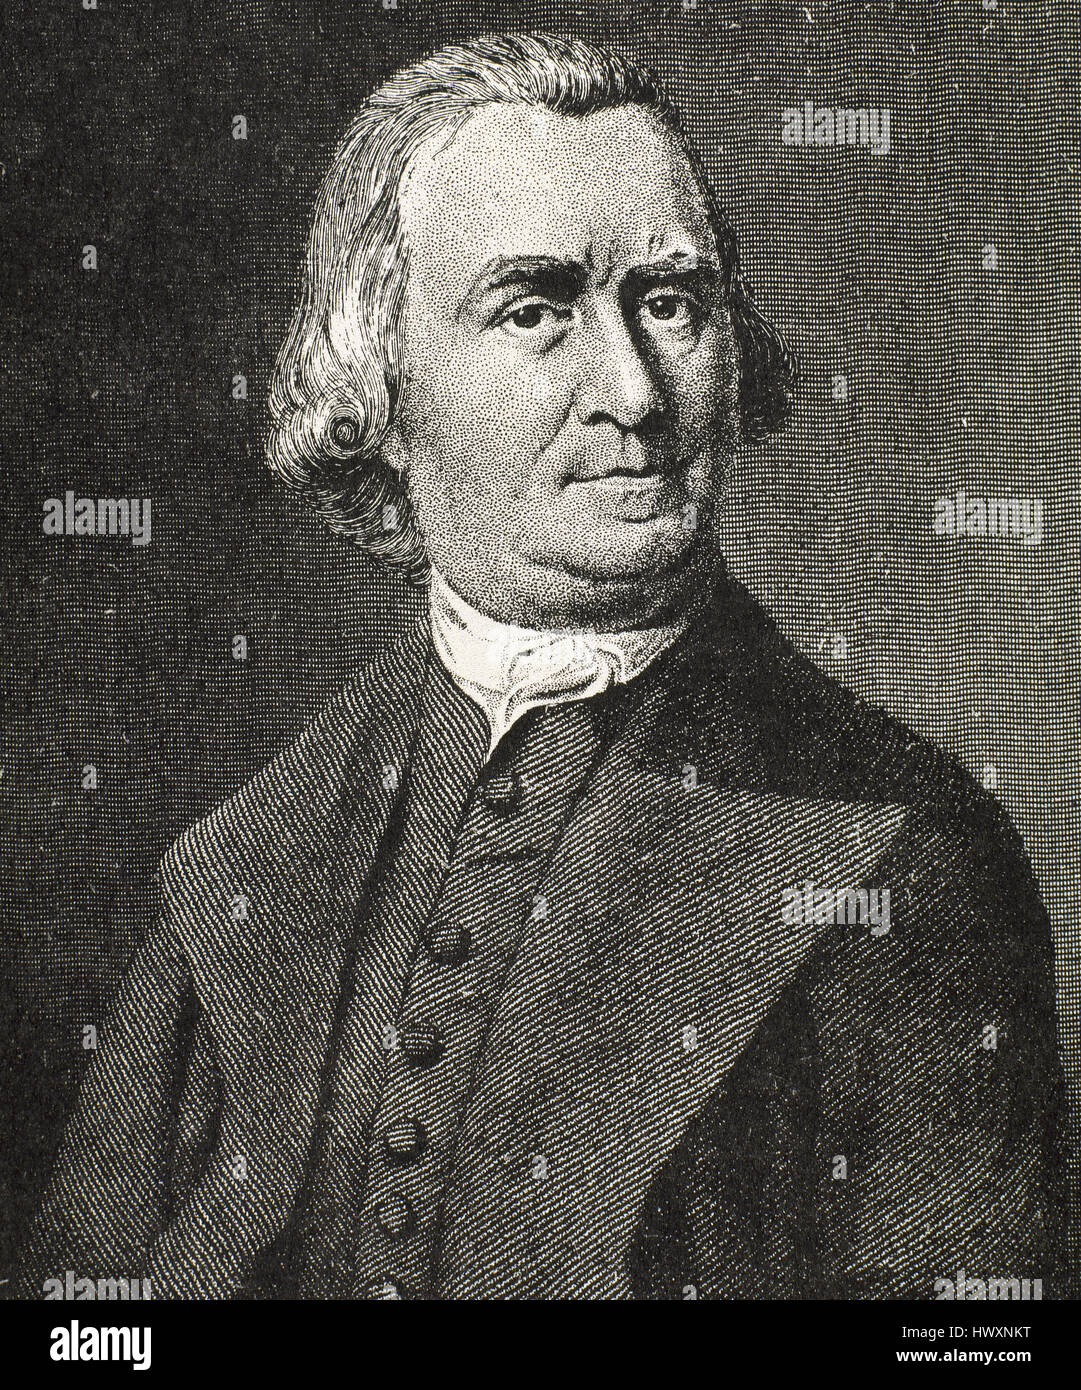 Samuel Adams (1722-1803). American statesman, political philosopher, and one of the Founding Fathers of the United States. Portrait. Engraving by John Singleton. Stock Photo